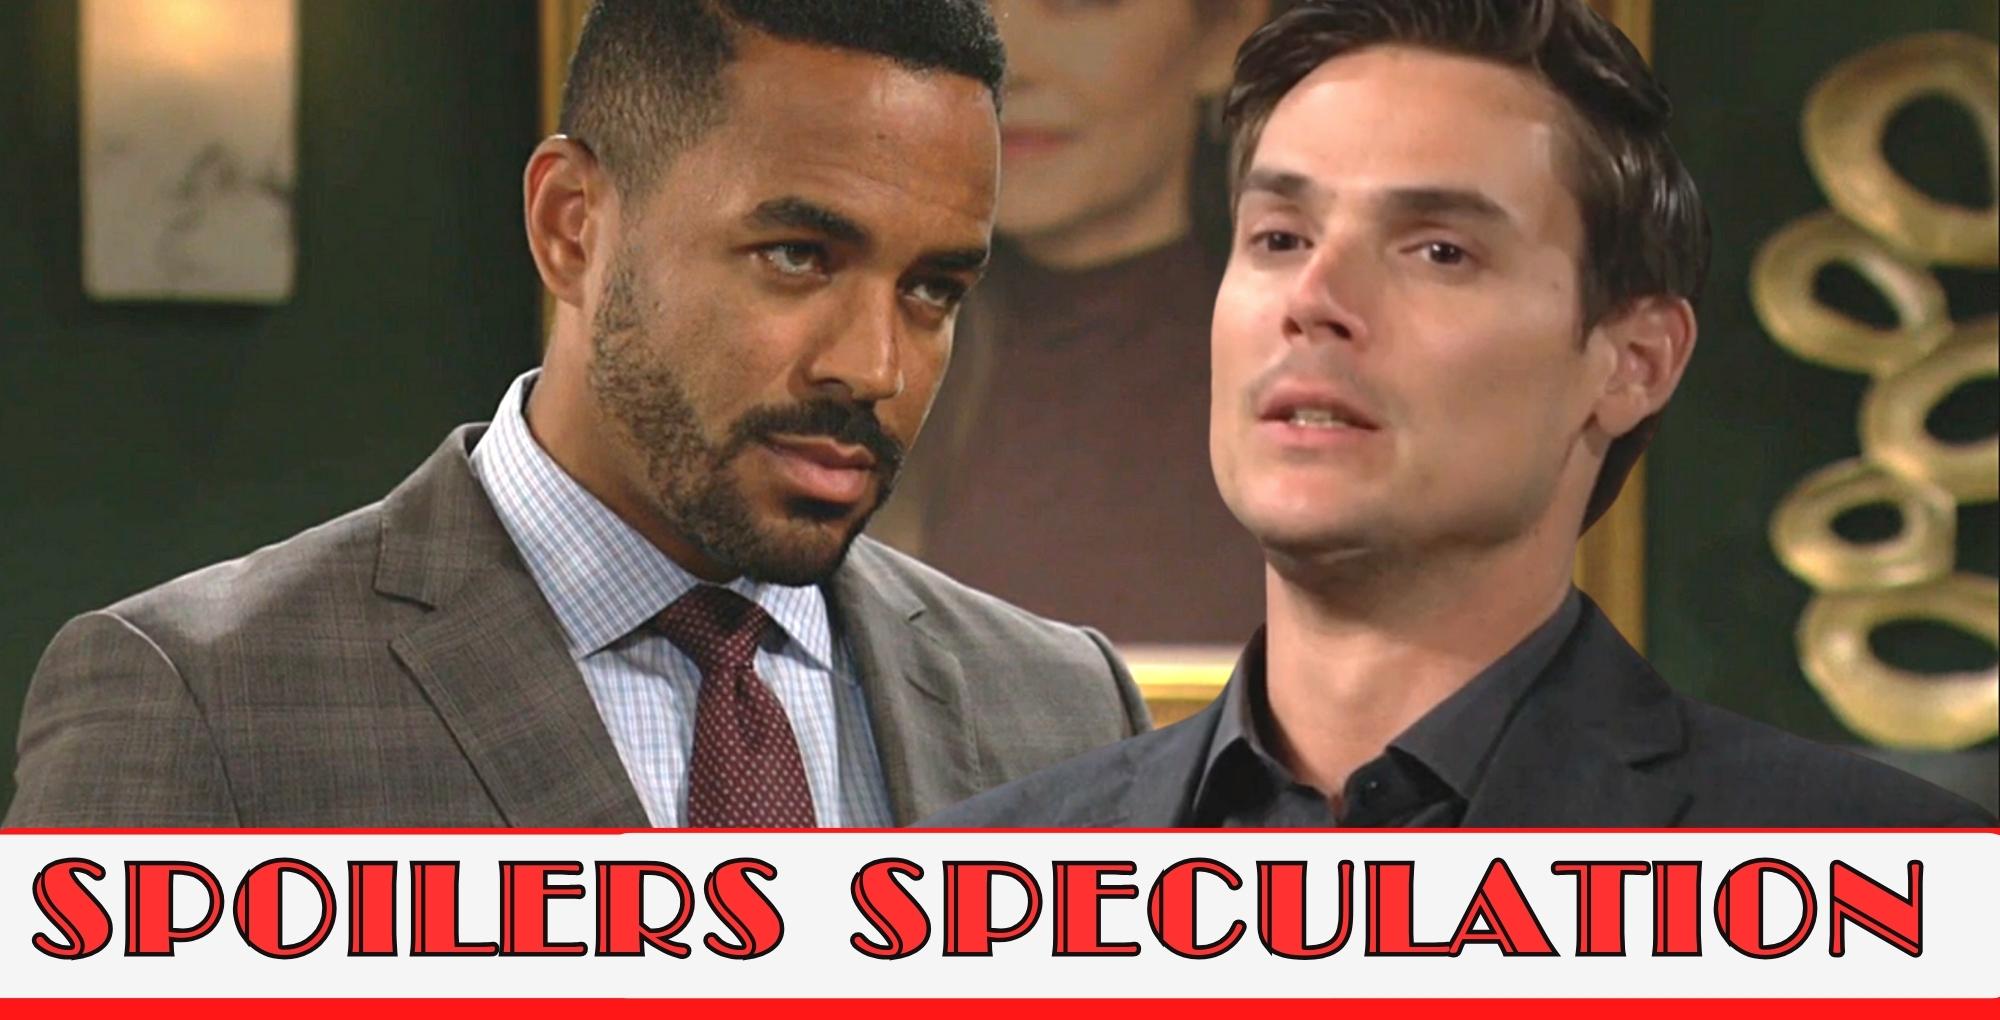 y&r spoilers speculation banner with nate looking at adam.